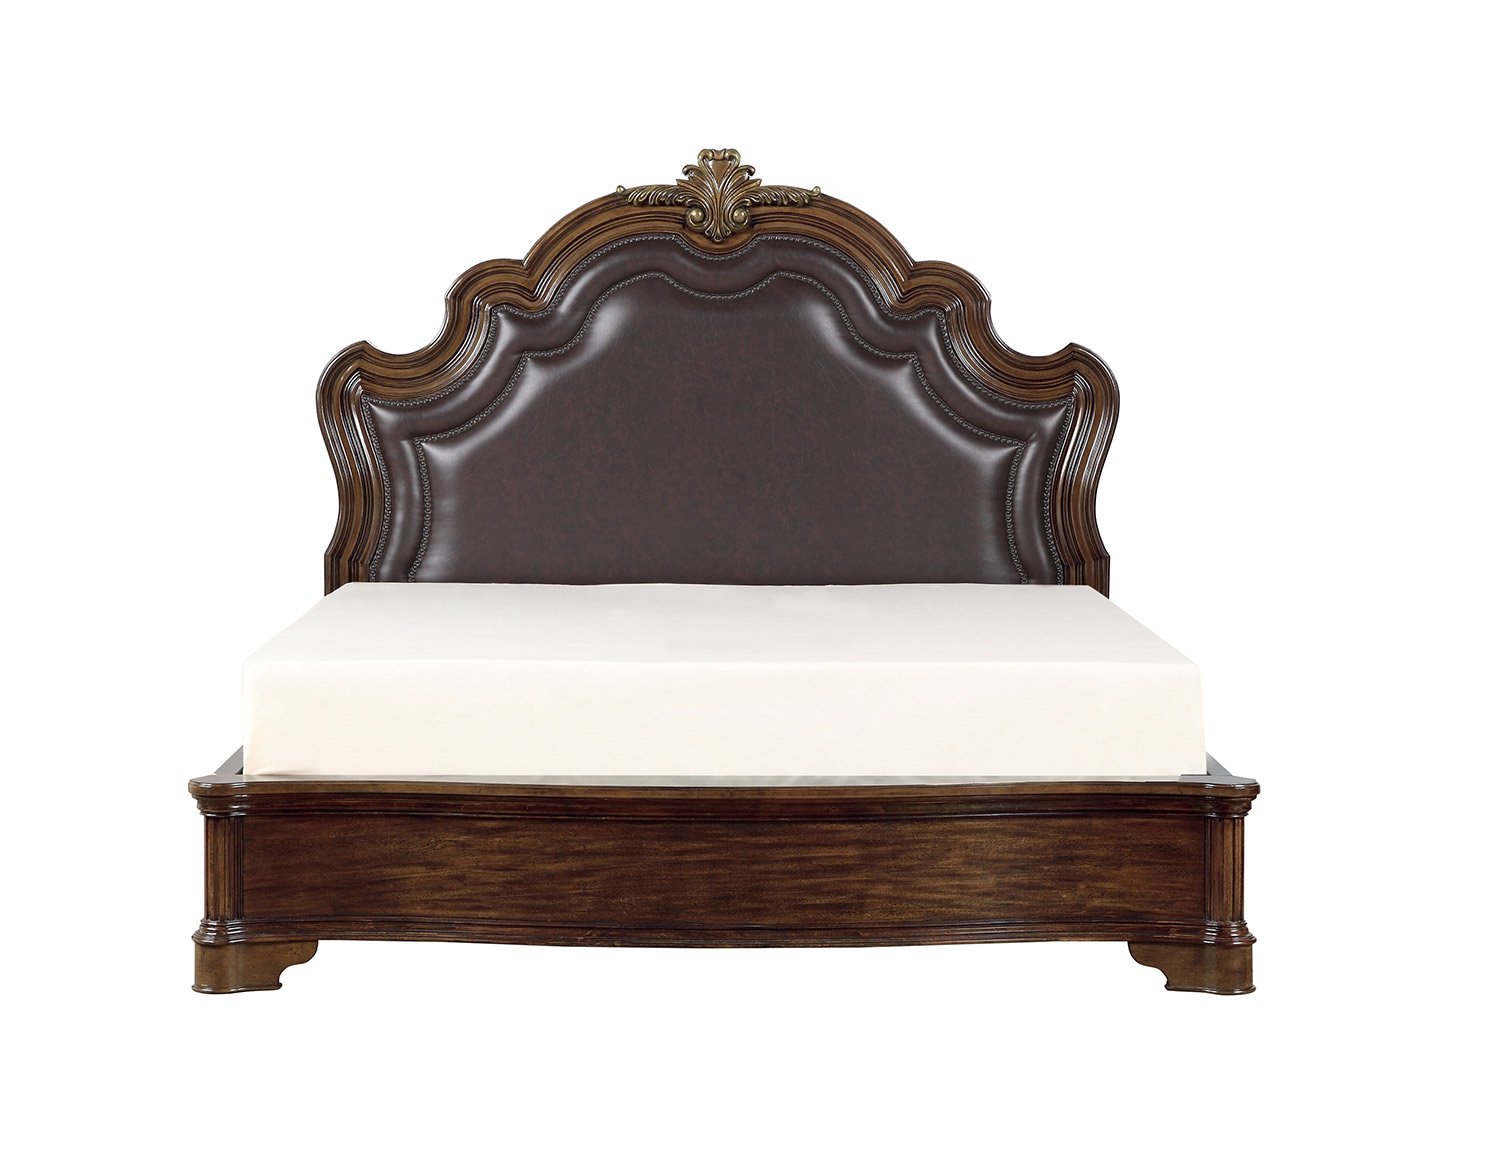 Homelegance Barbary Bed - Traditional Cherry